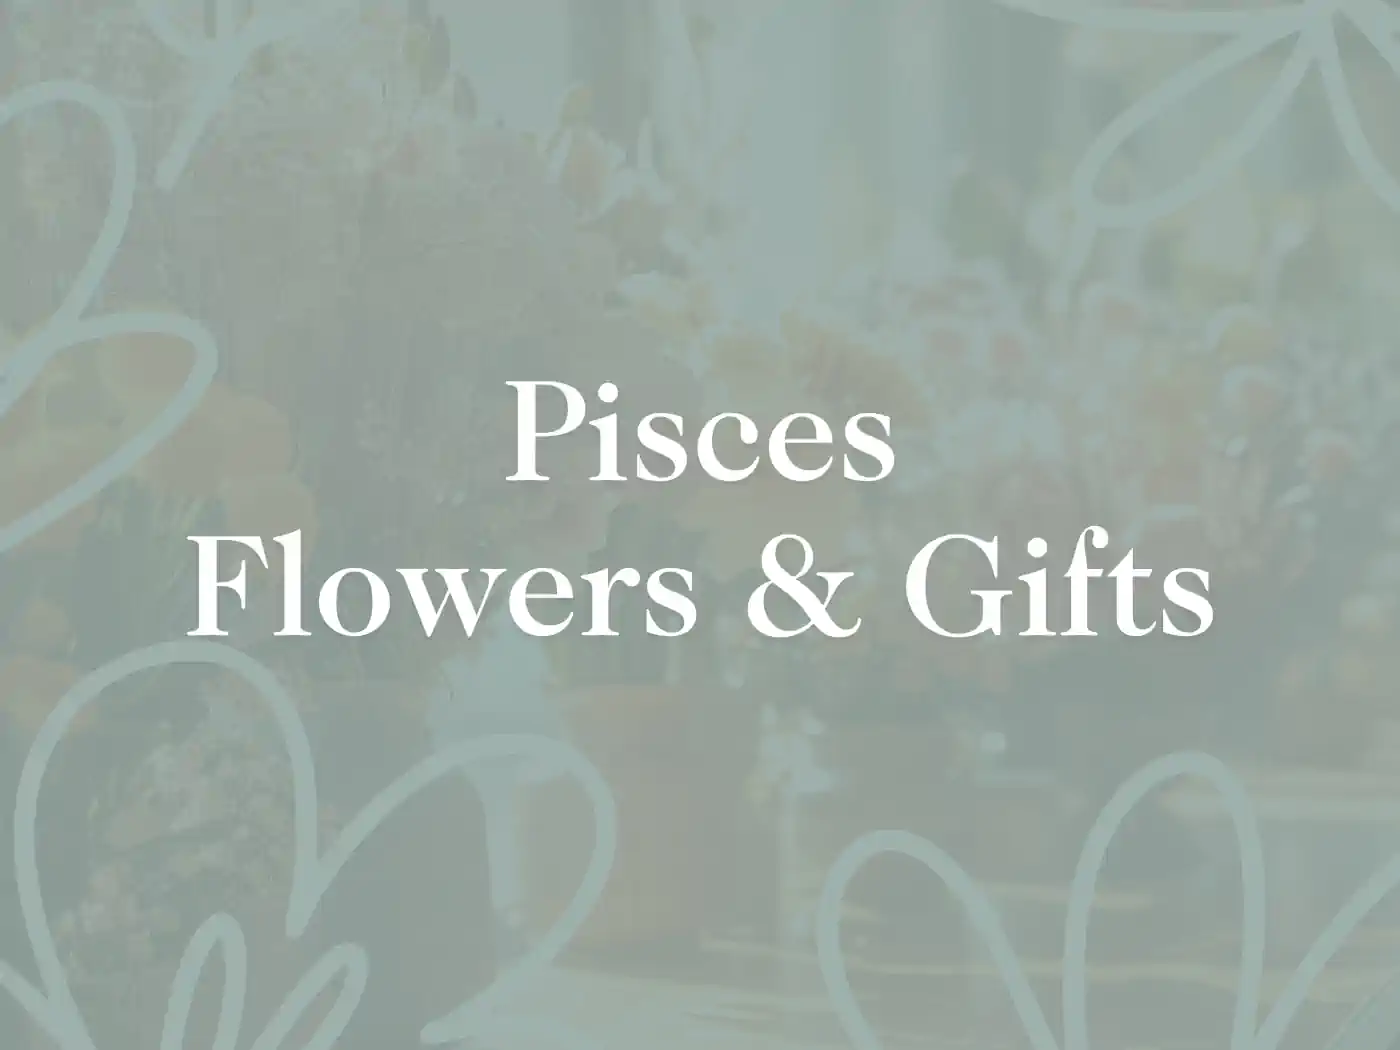 A faded image of various flowers in the background with text overlay: Pisces Flowers & Gifts. Fabulous Flowers and Gifts.